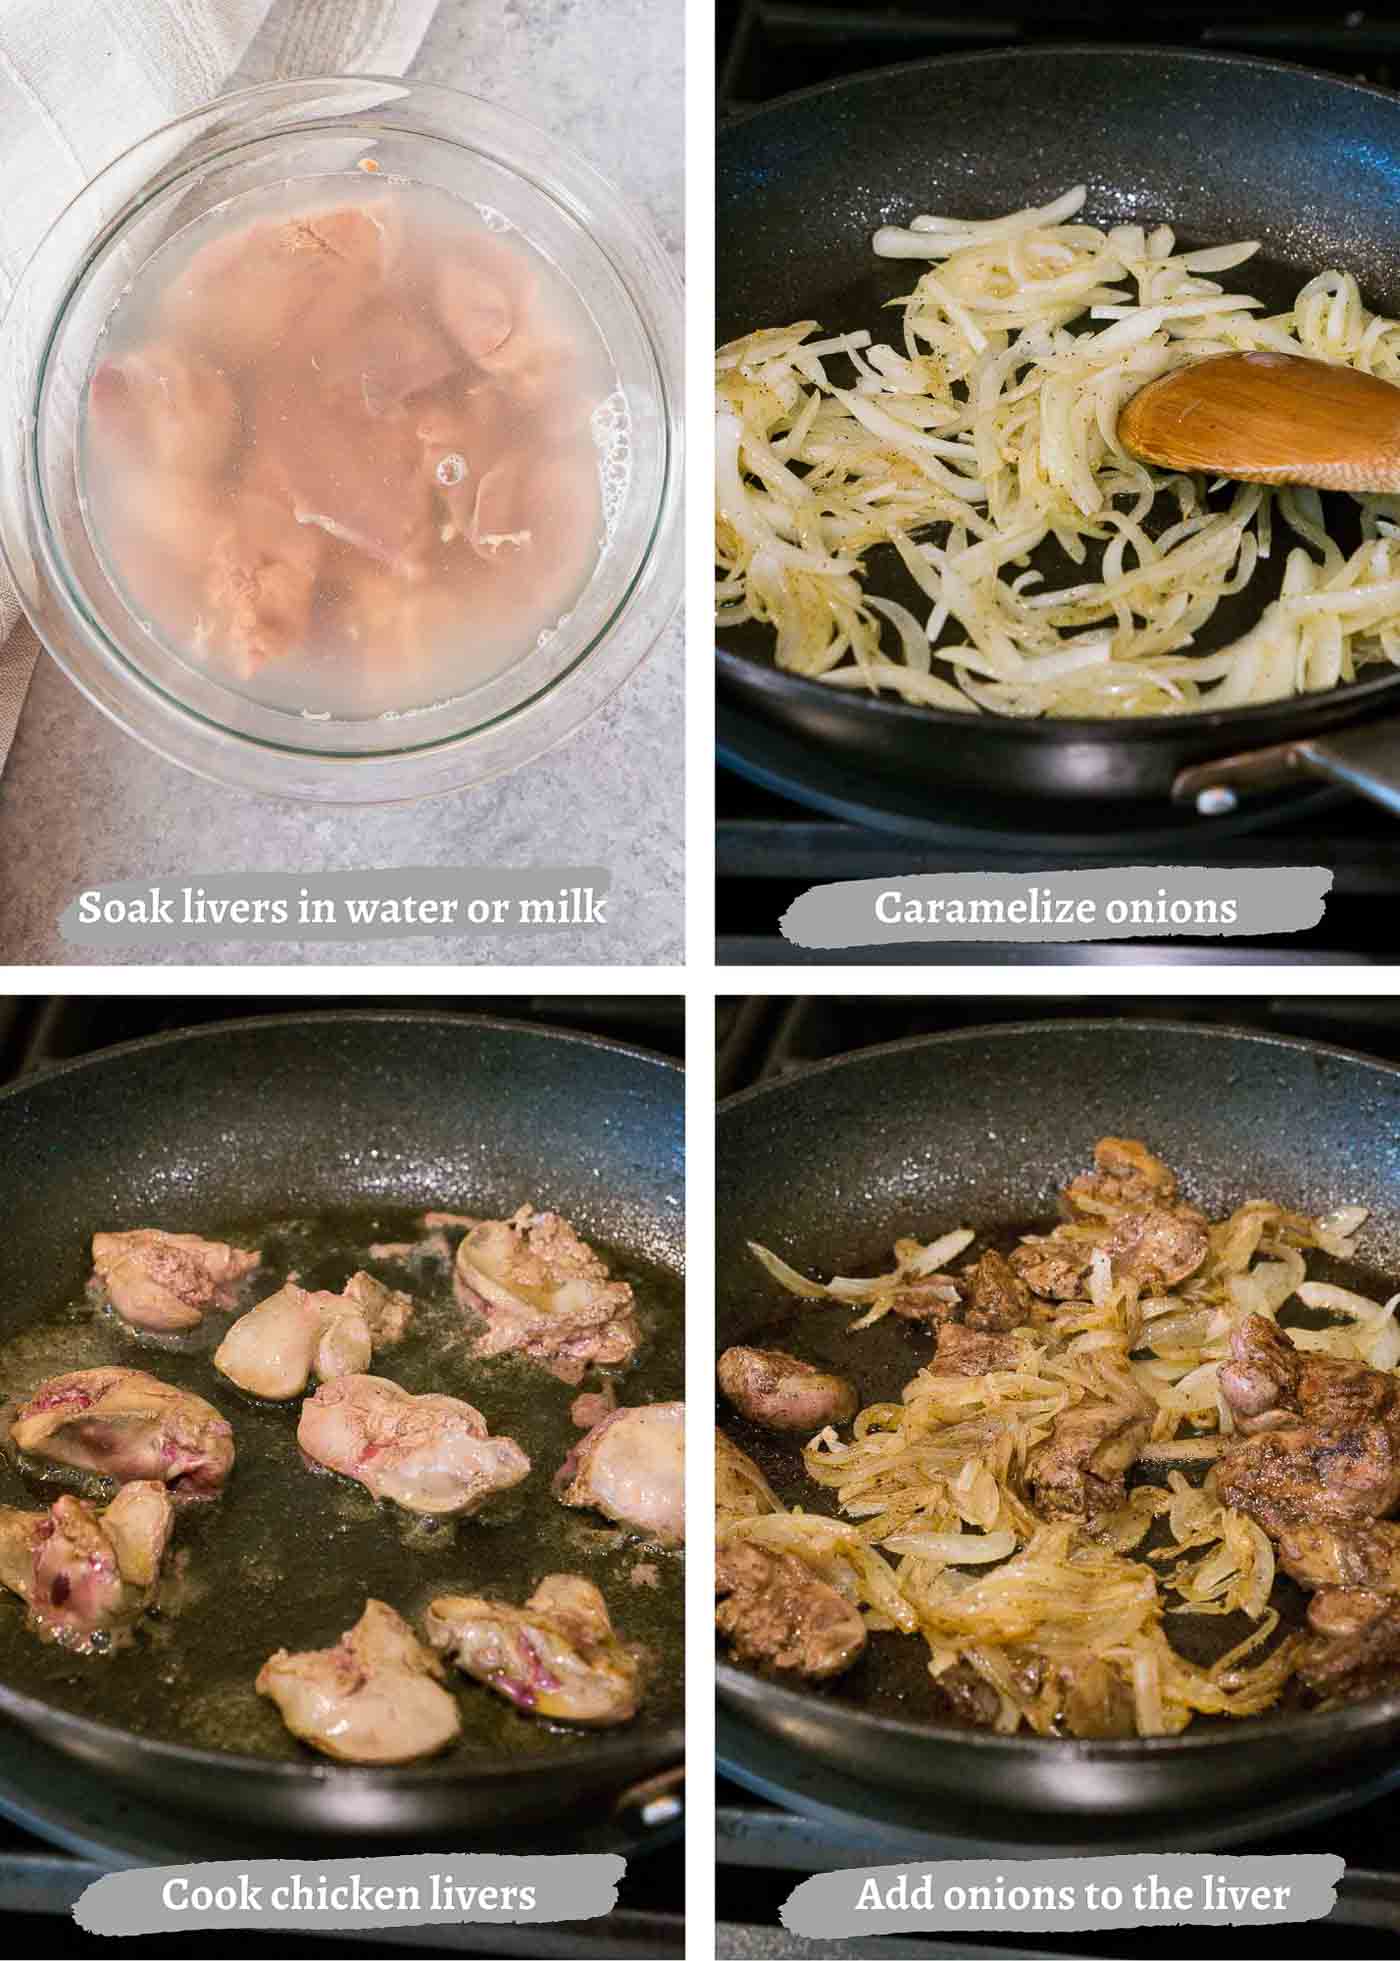 making chicken livers and caramelized onions - process images